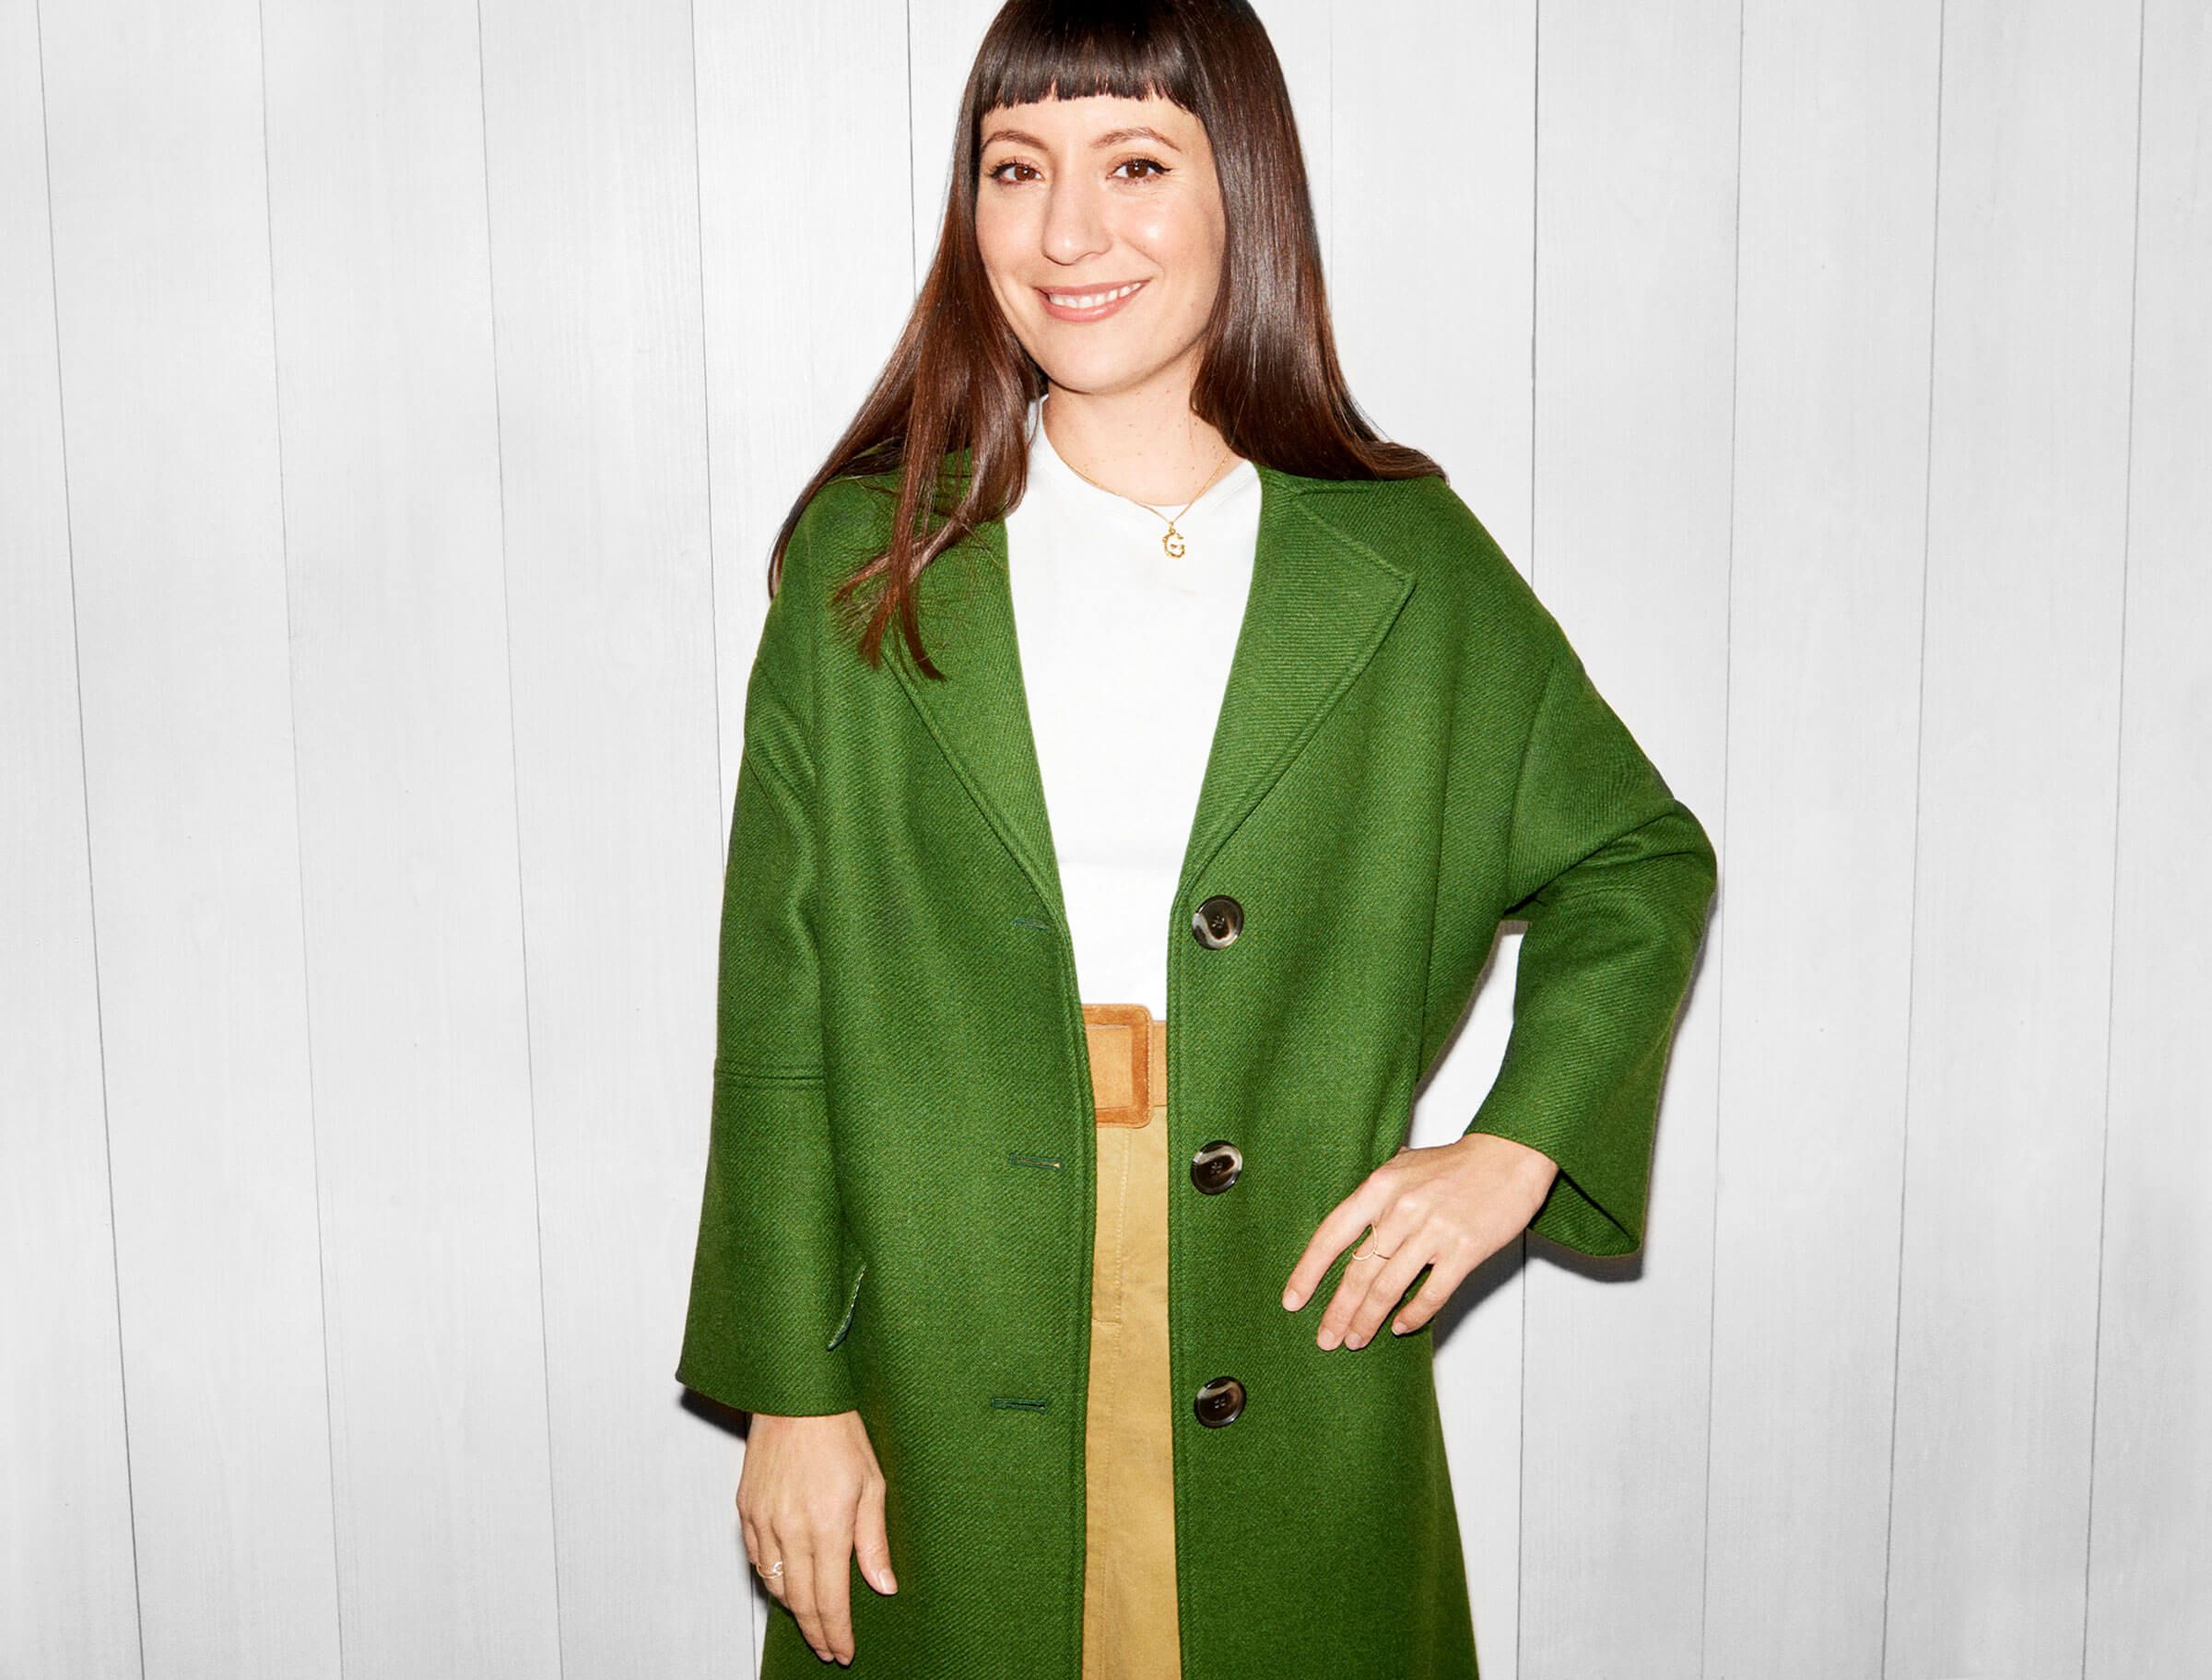 Katherine Ormerod in a green coat